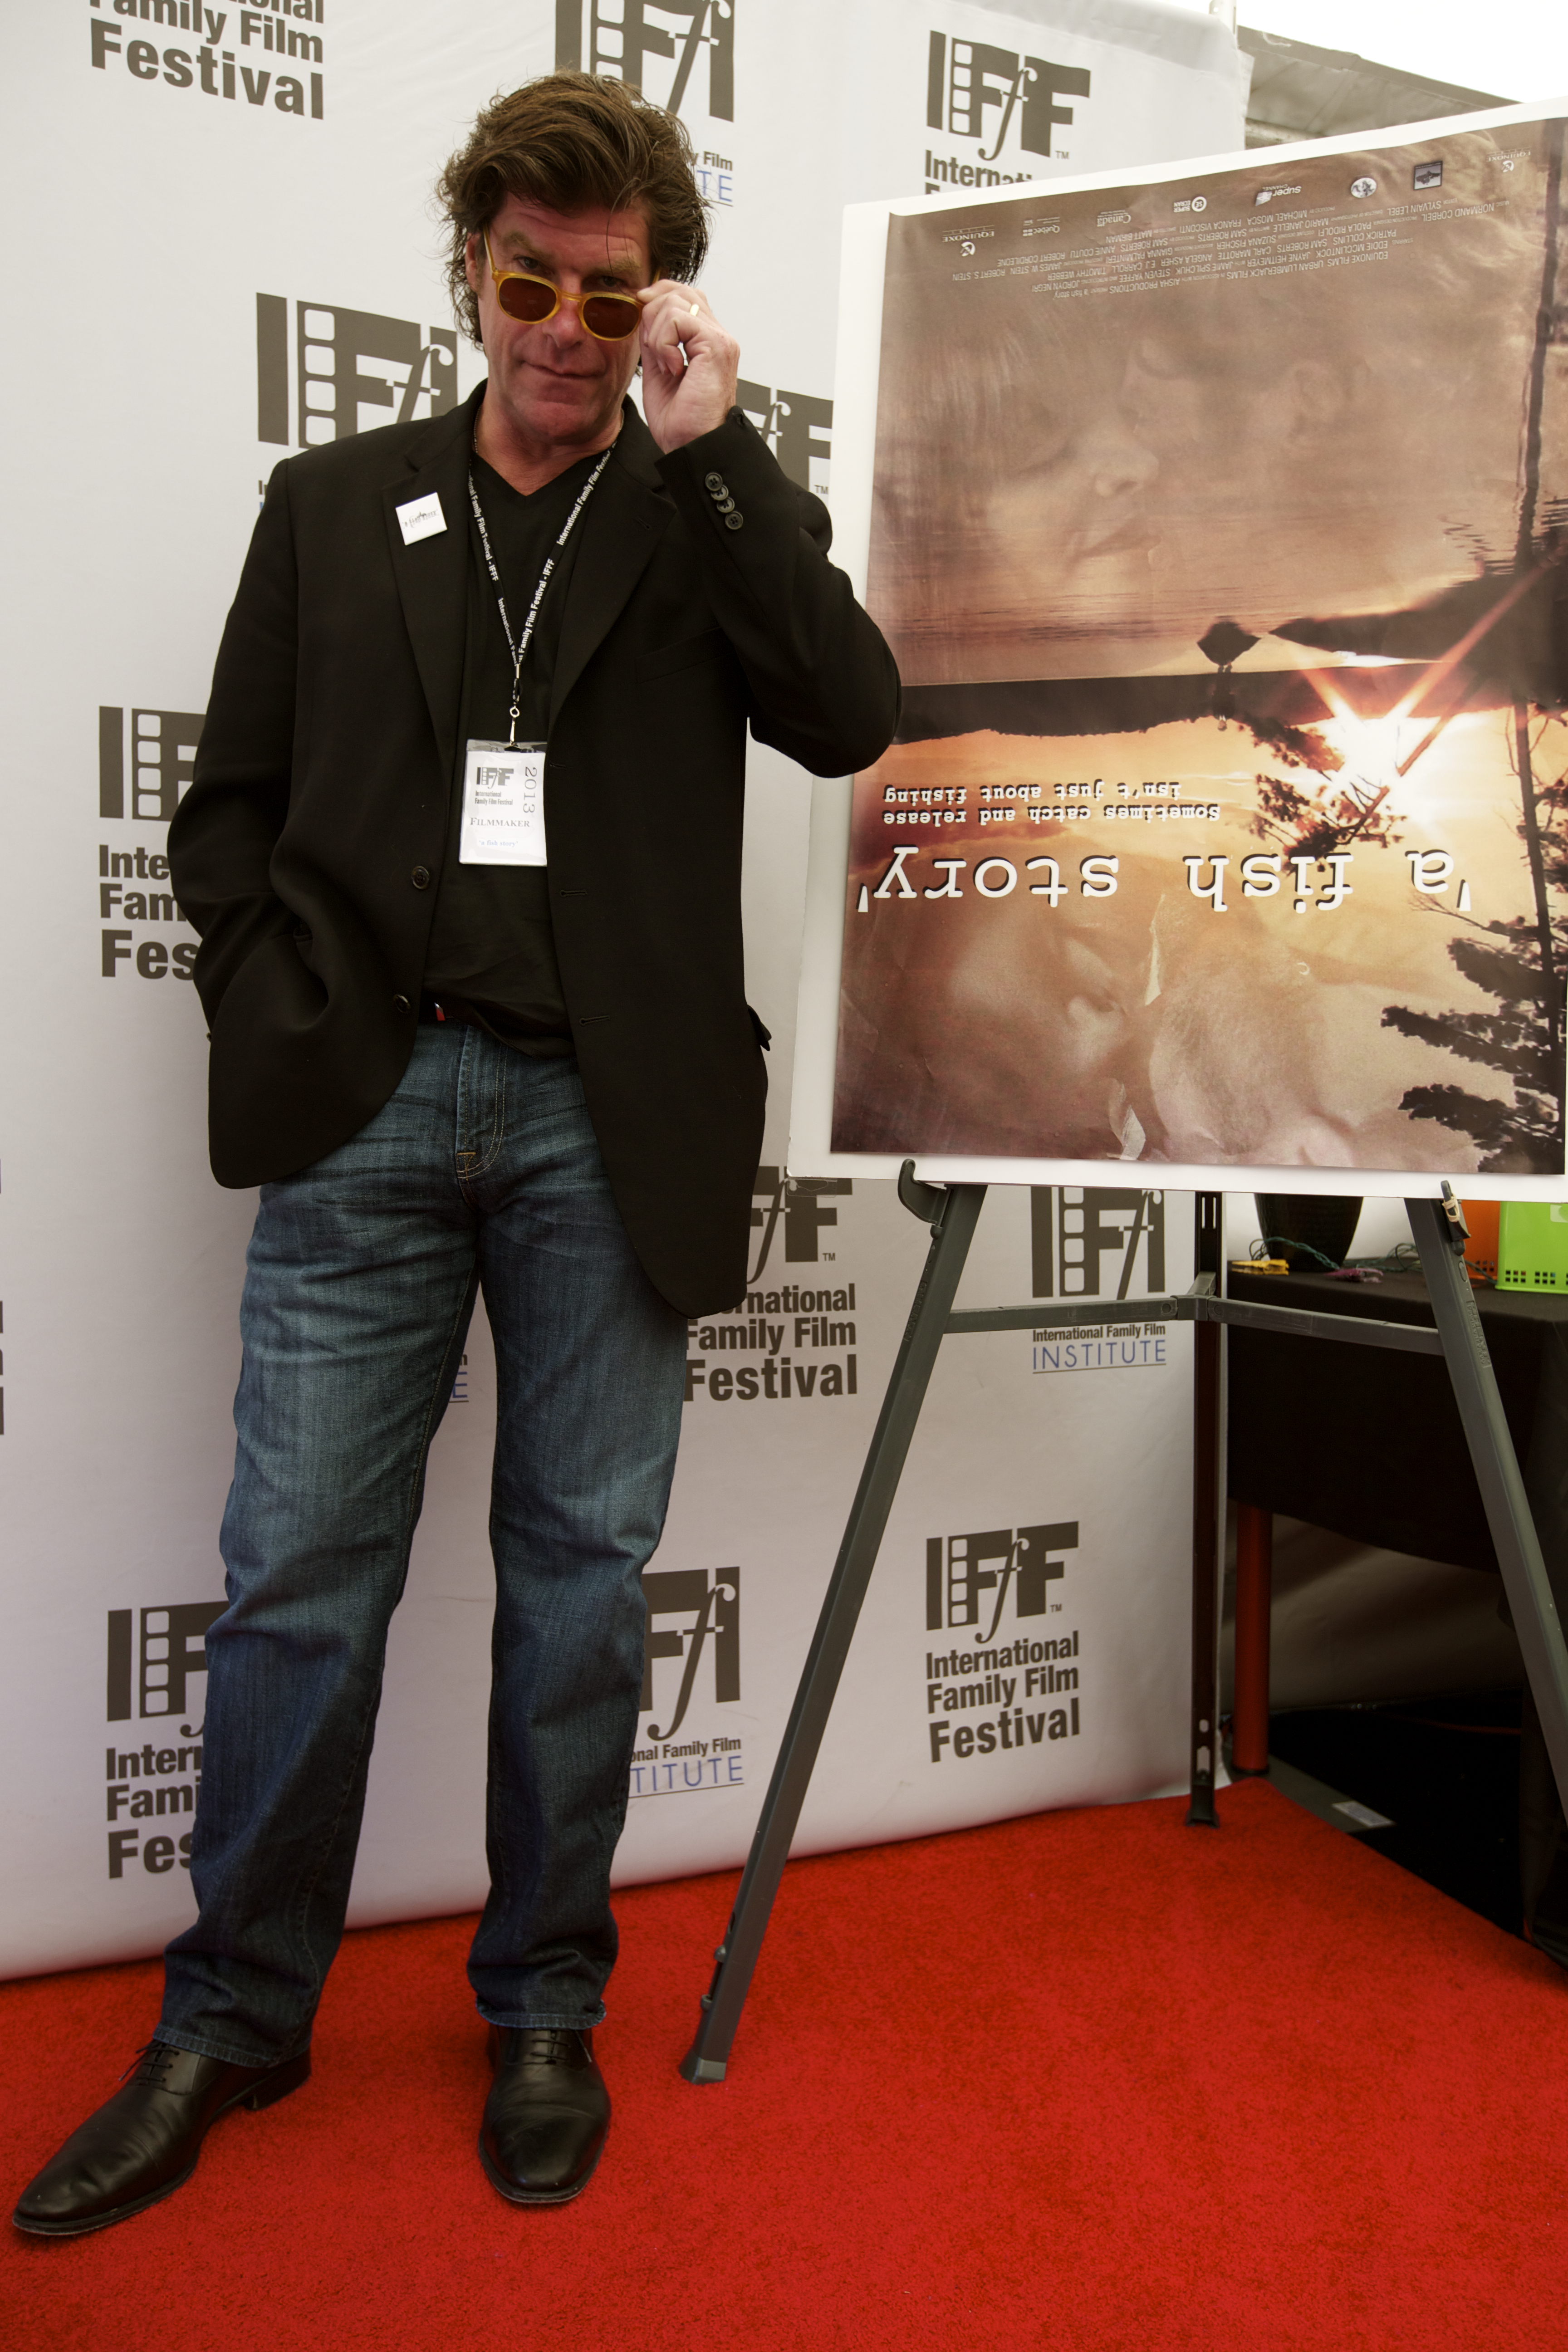 @ Int'l Family Film Festival - 2013 (w/upside down movie poster!)